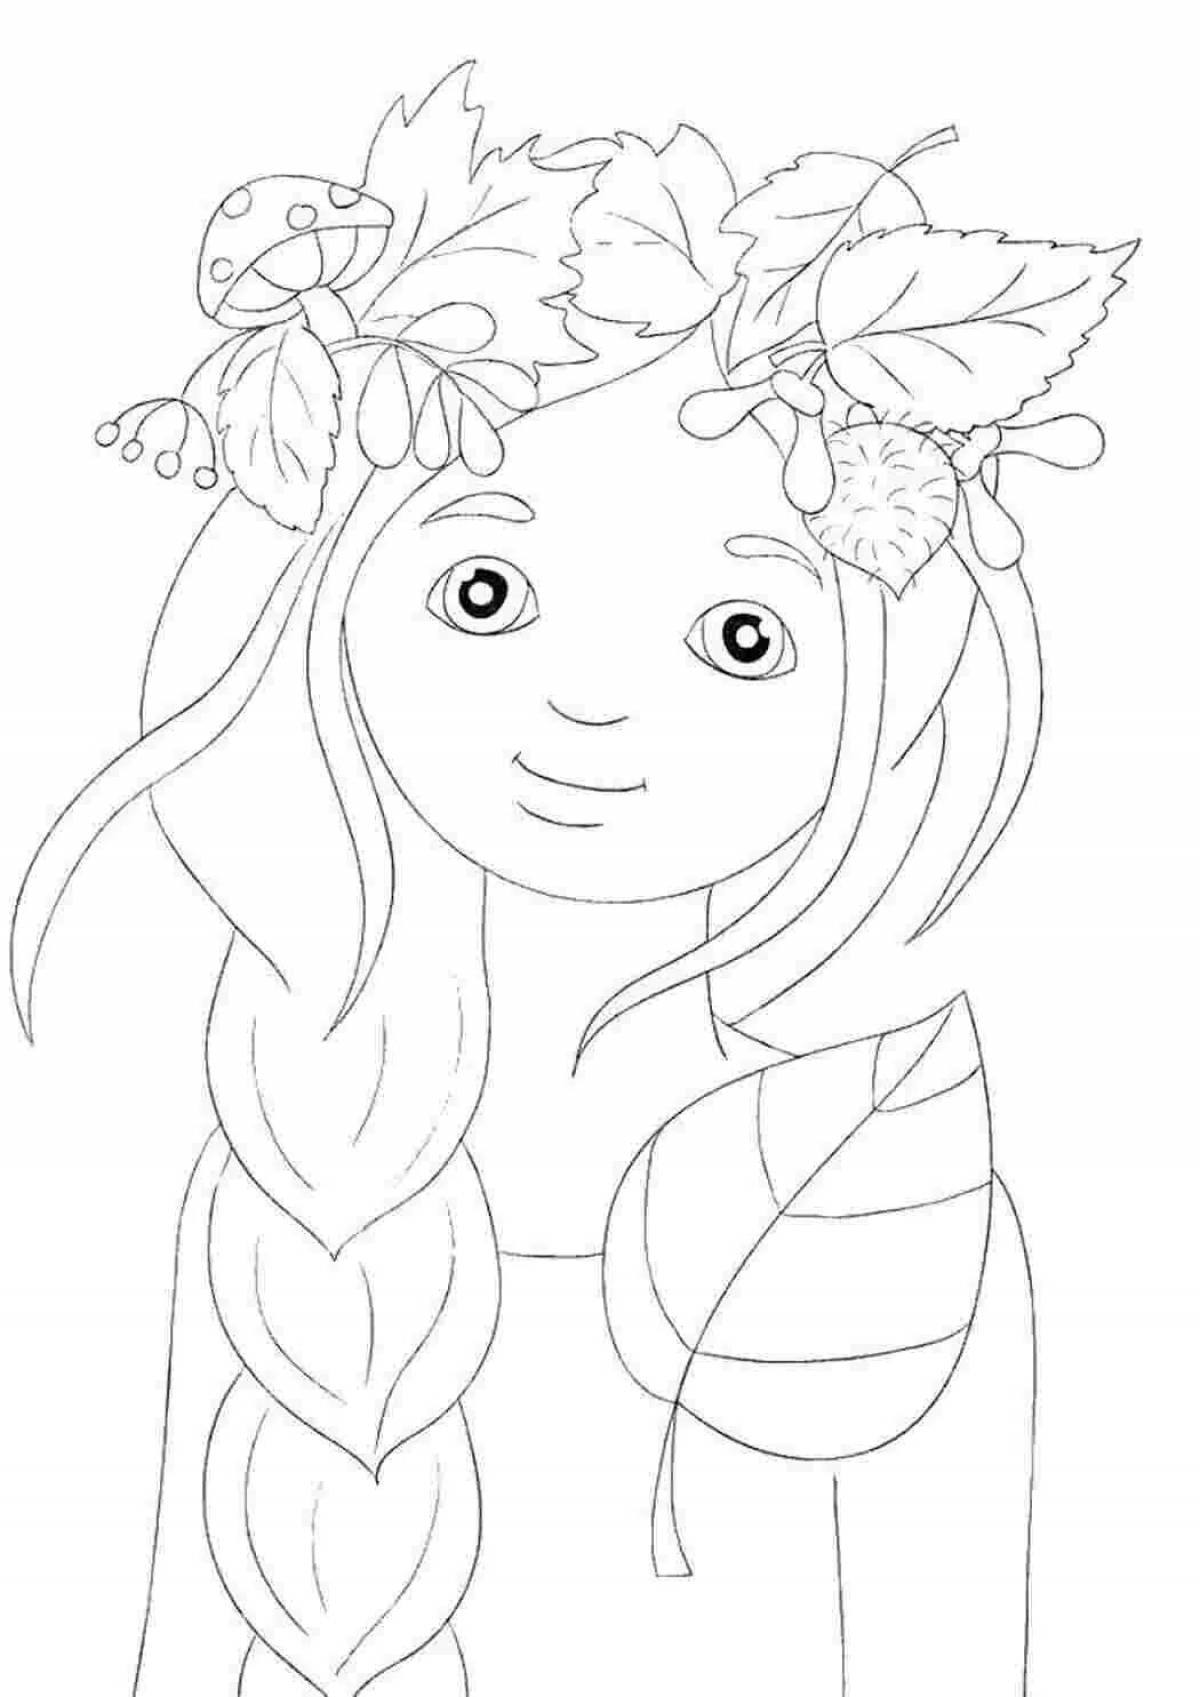 Great autumn girl coloring book